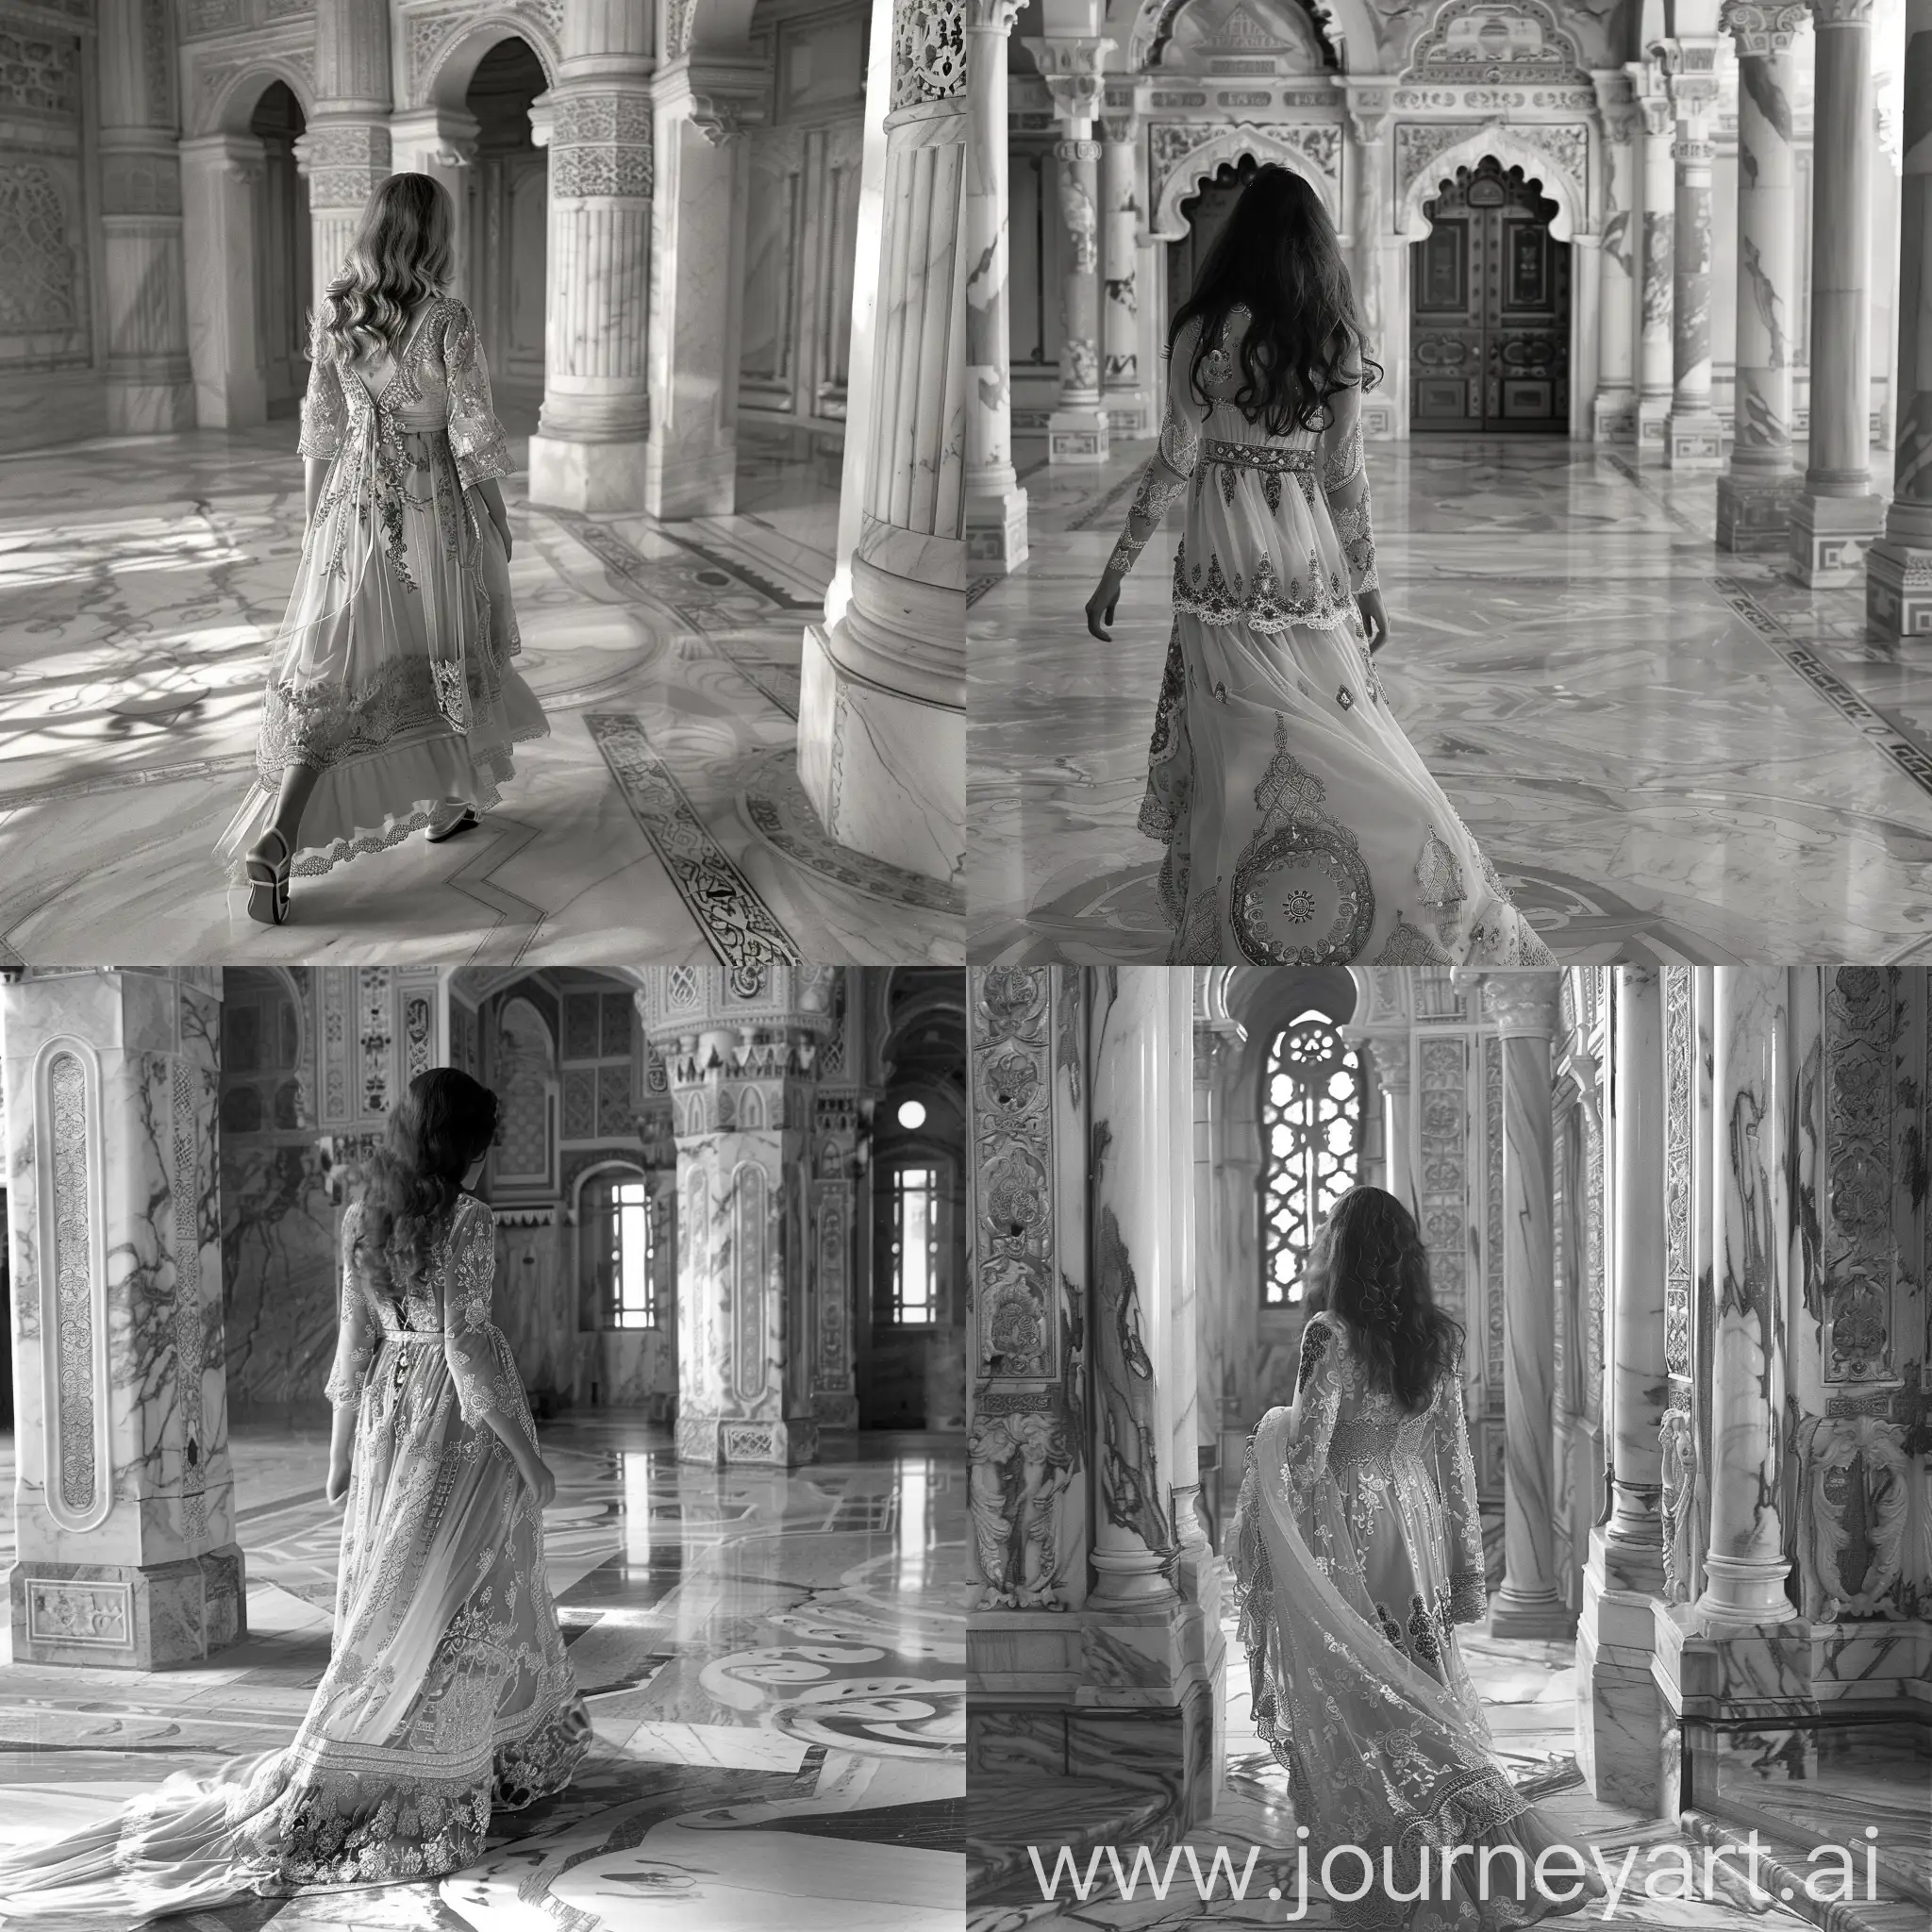 Turkish-Ornamented-Girl-Strolling-Marble-Eastern-Palace